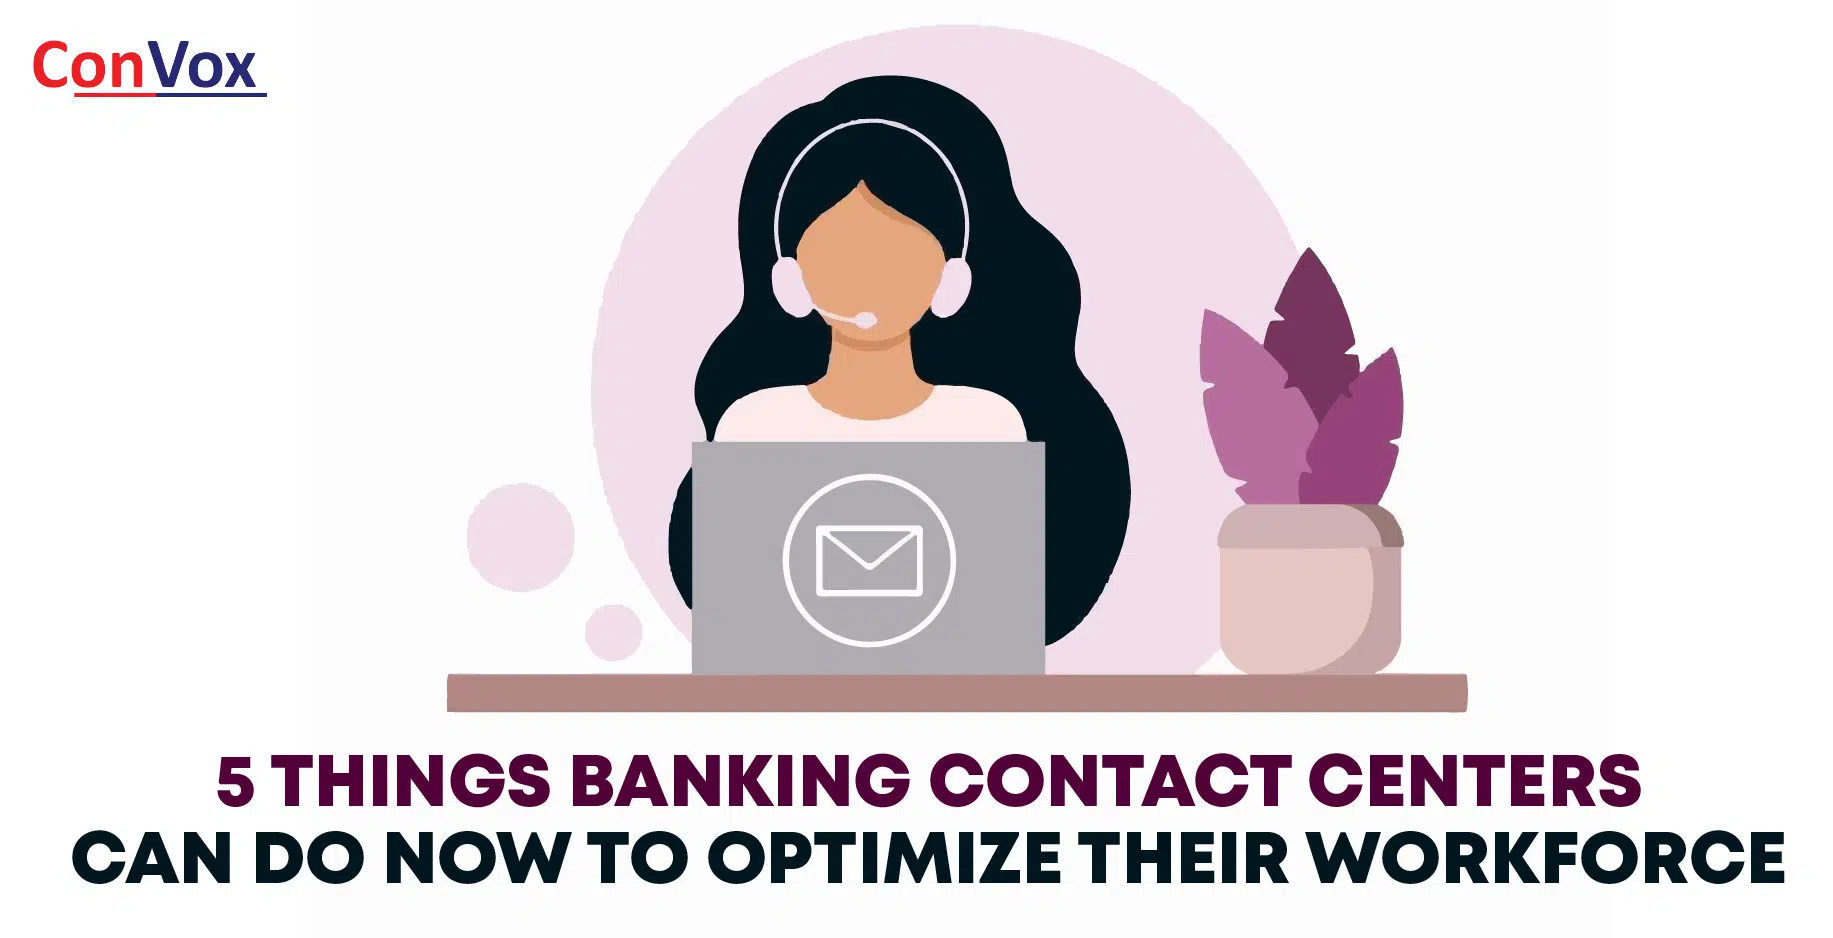 5 Things Banking Contact Centers Can Do Now To Optimize Their Workforce